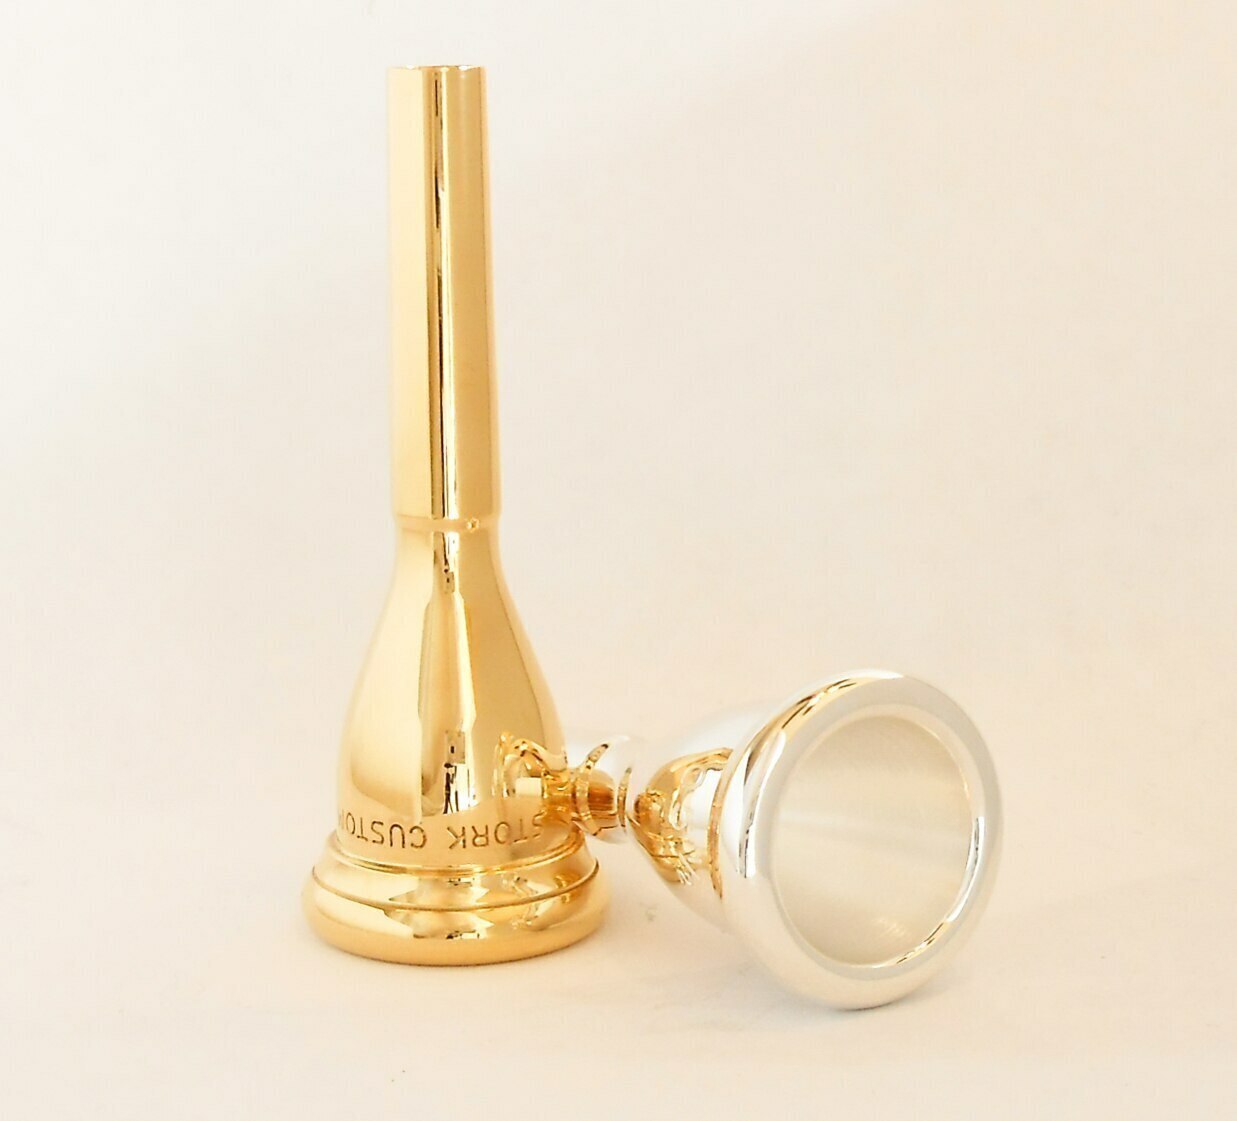 C6A Stork 24K Gold Rim & Cup French Horn Mouthpiece